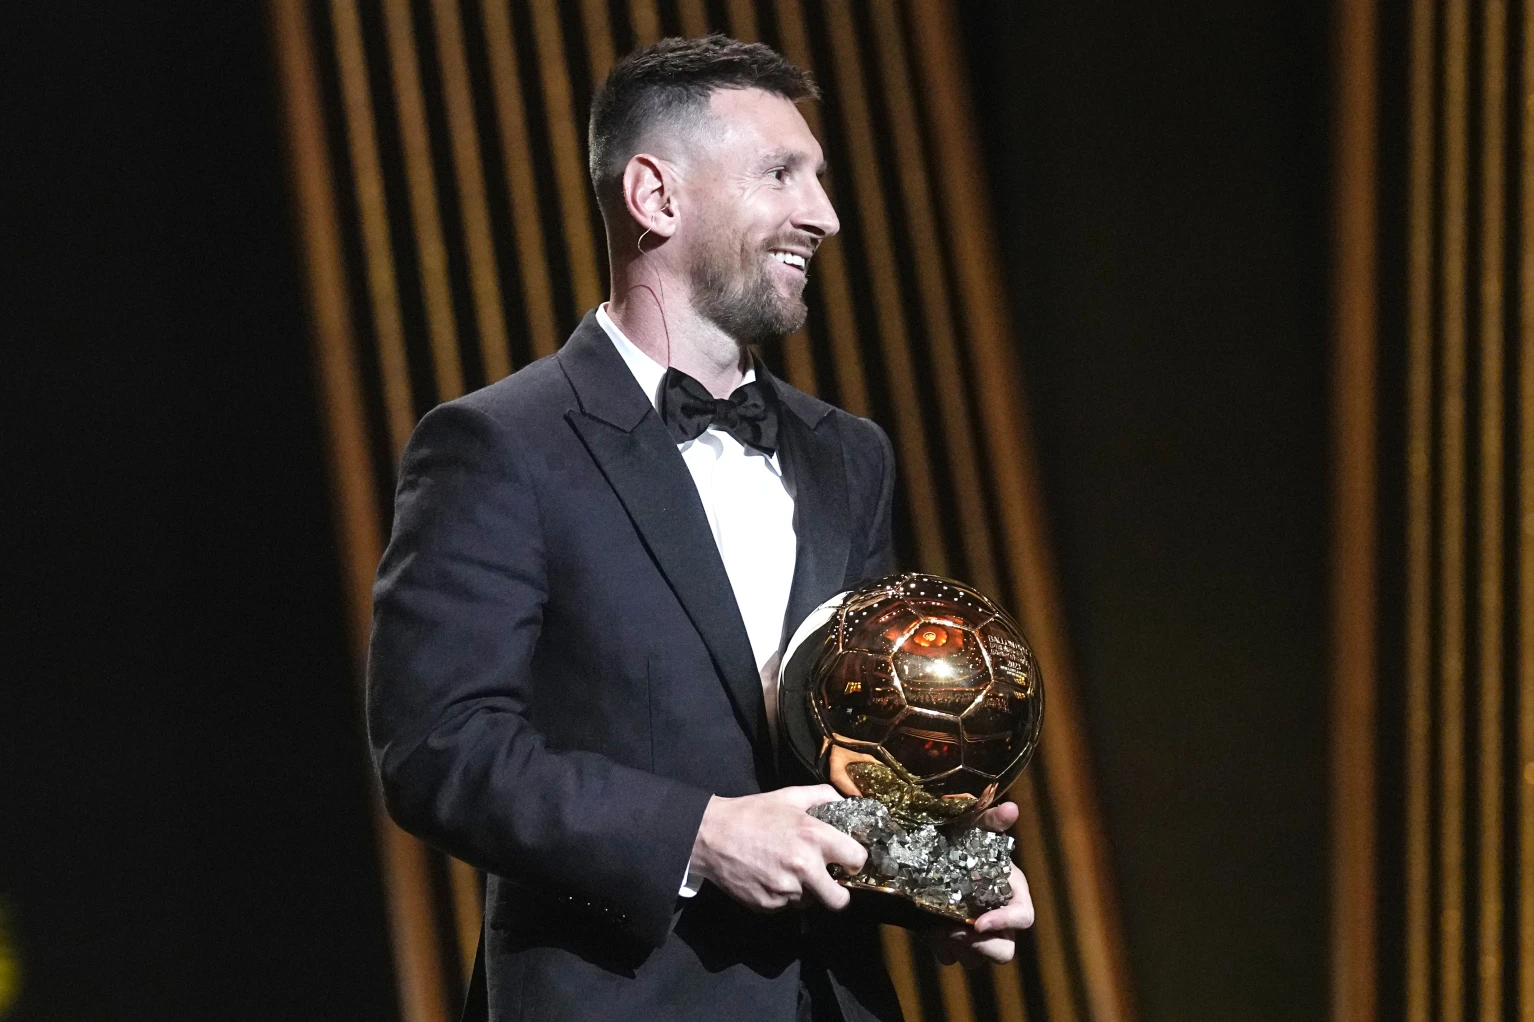 Argentina captain Lionel Messi wins record eighth Ballon d’Or for best player in the world